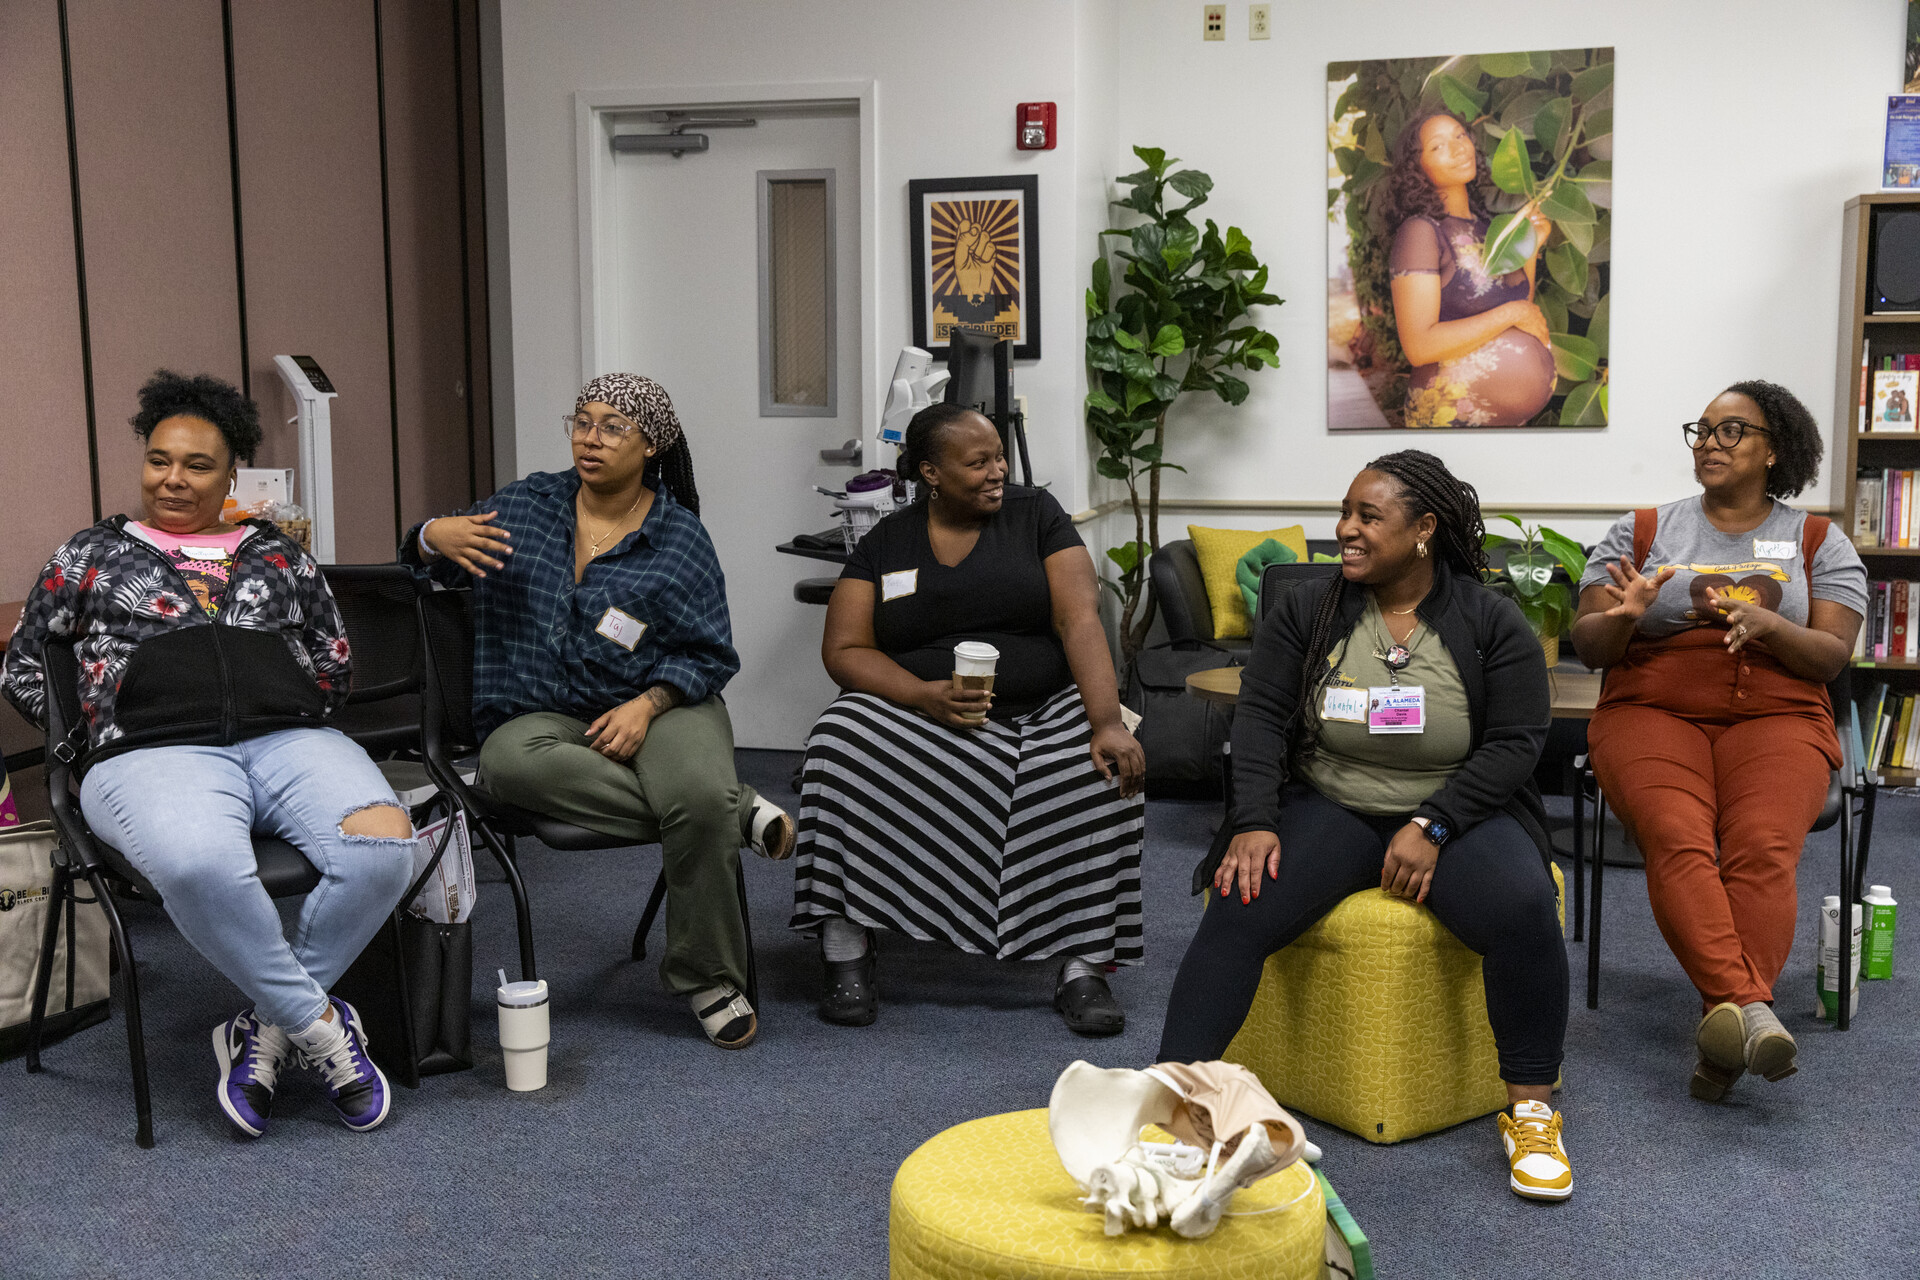 Five African American women sit in a room, smiling and conversing.